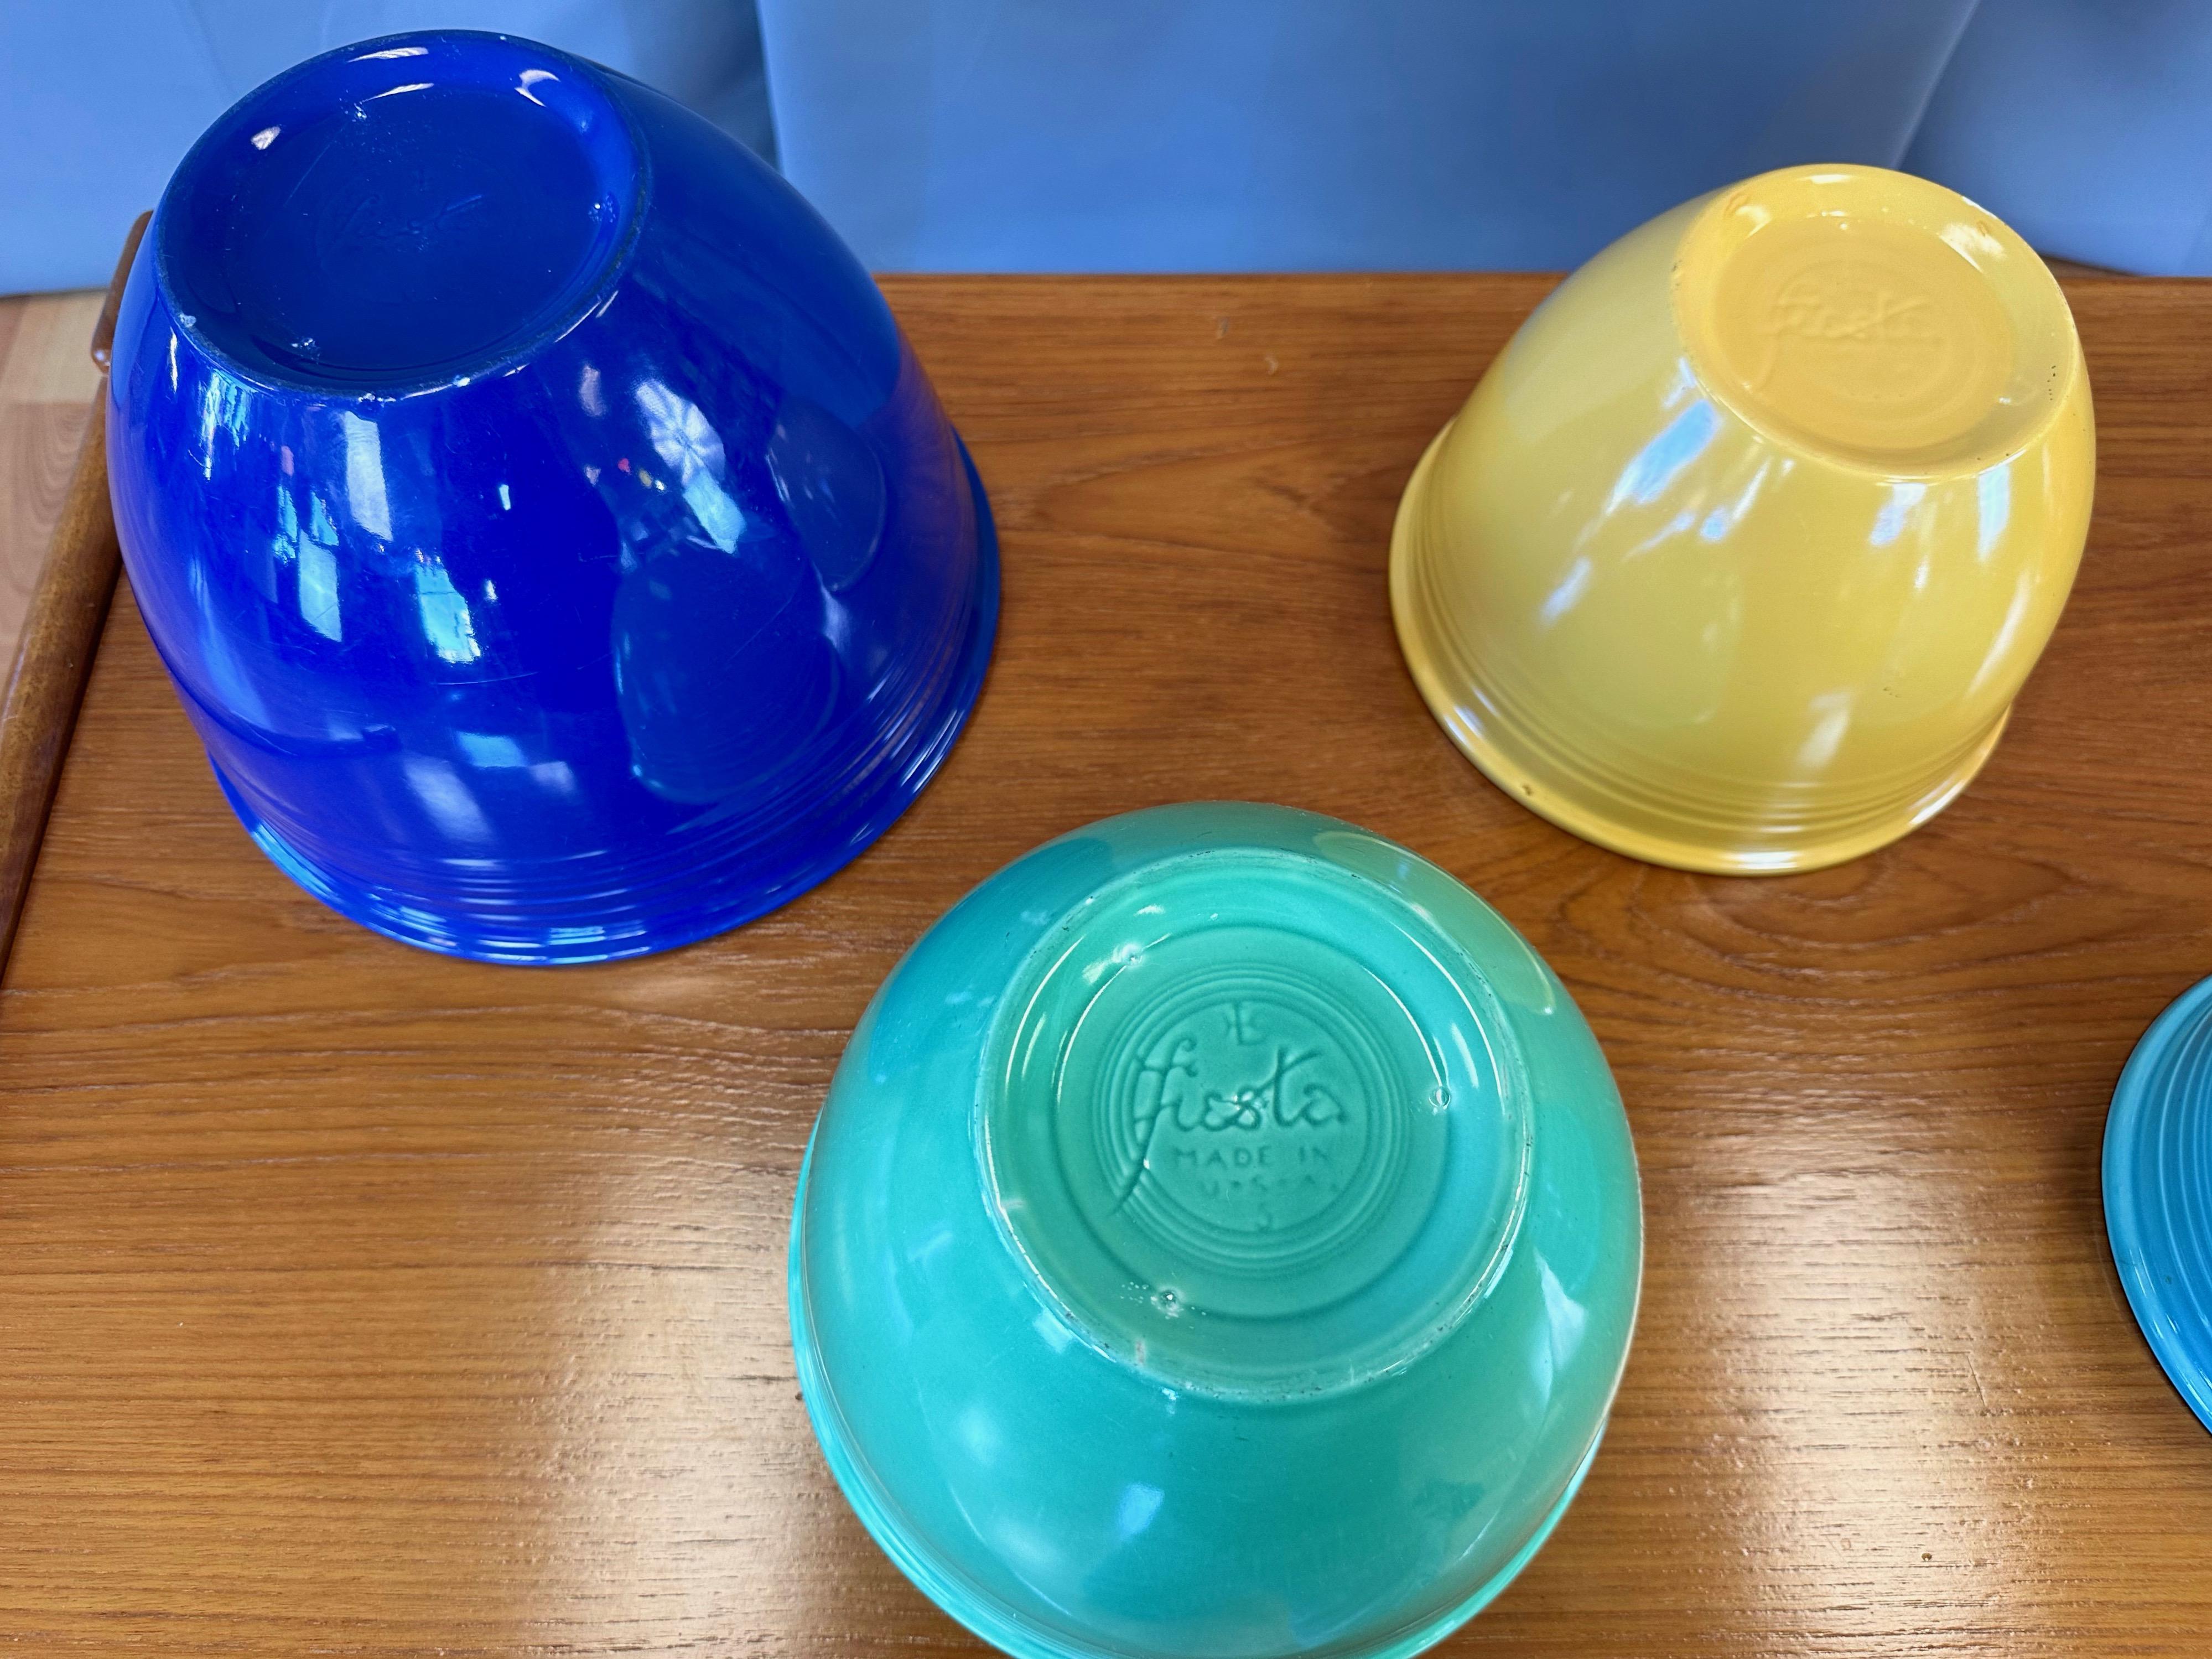 Early Vintage Fiestaware Nesting Mixing Bowls, Multi-Color Set of Six, c. 1940 For Sale 8